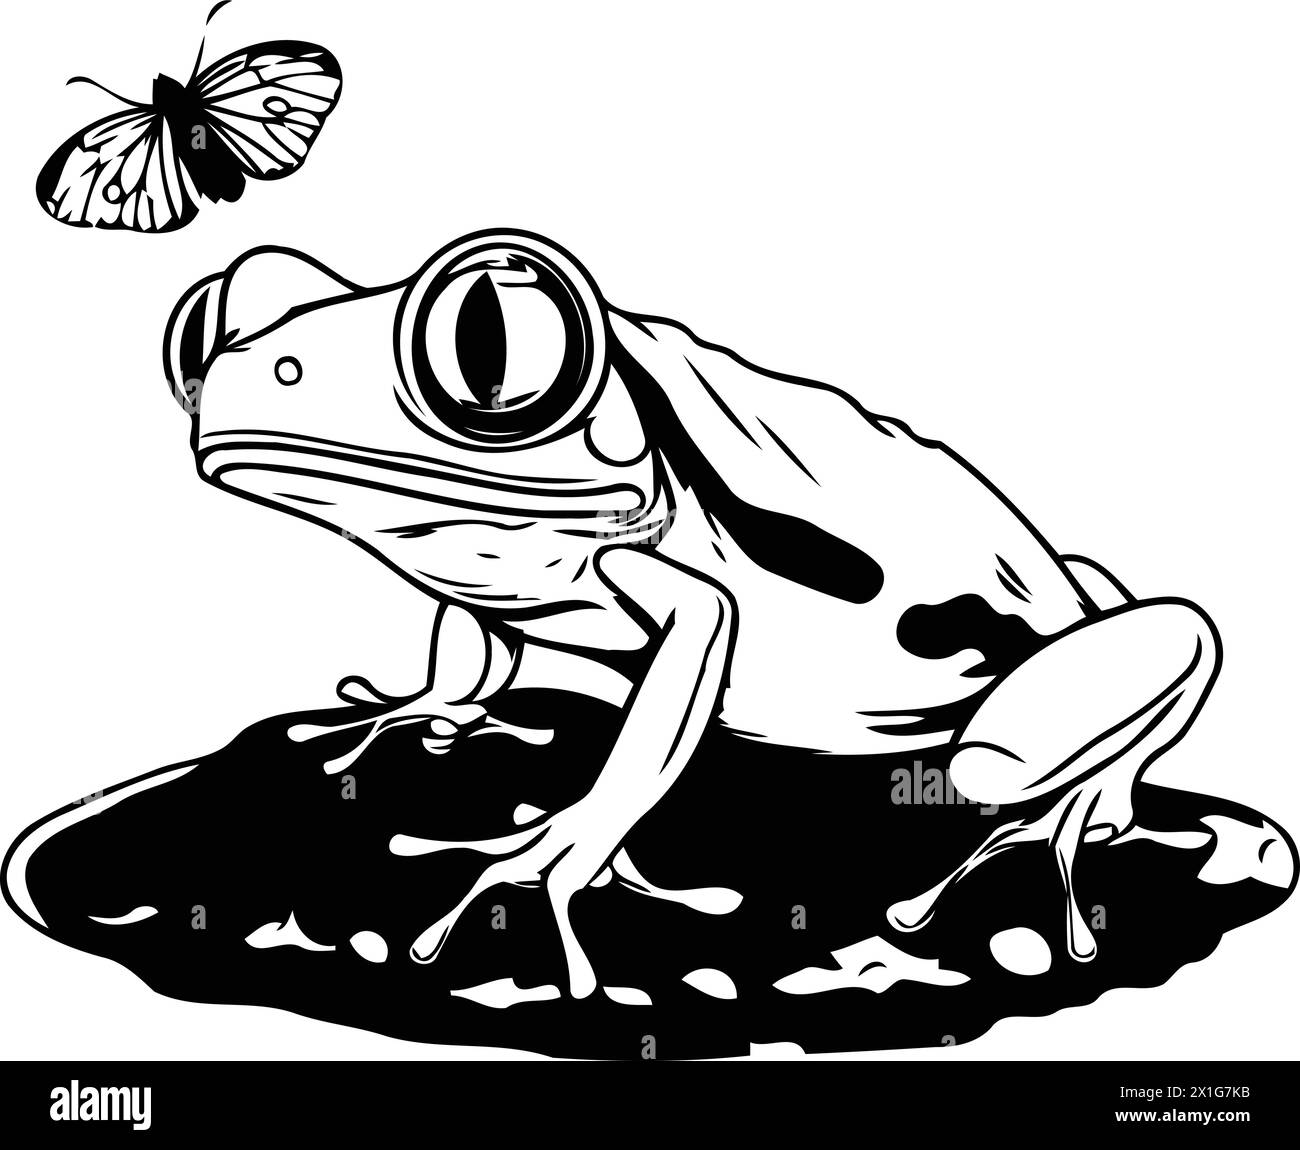 Frog on a stone with a butterfly. Cartoon vector illustration. Stock Vector